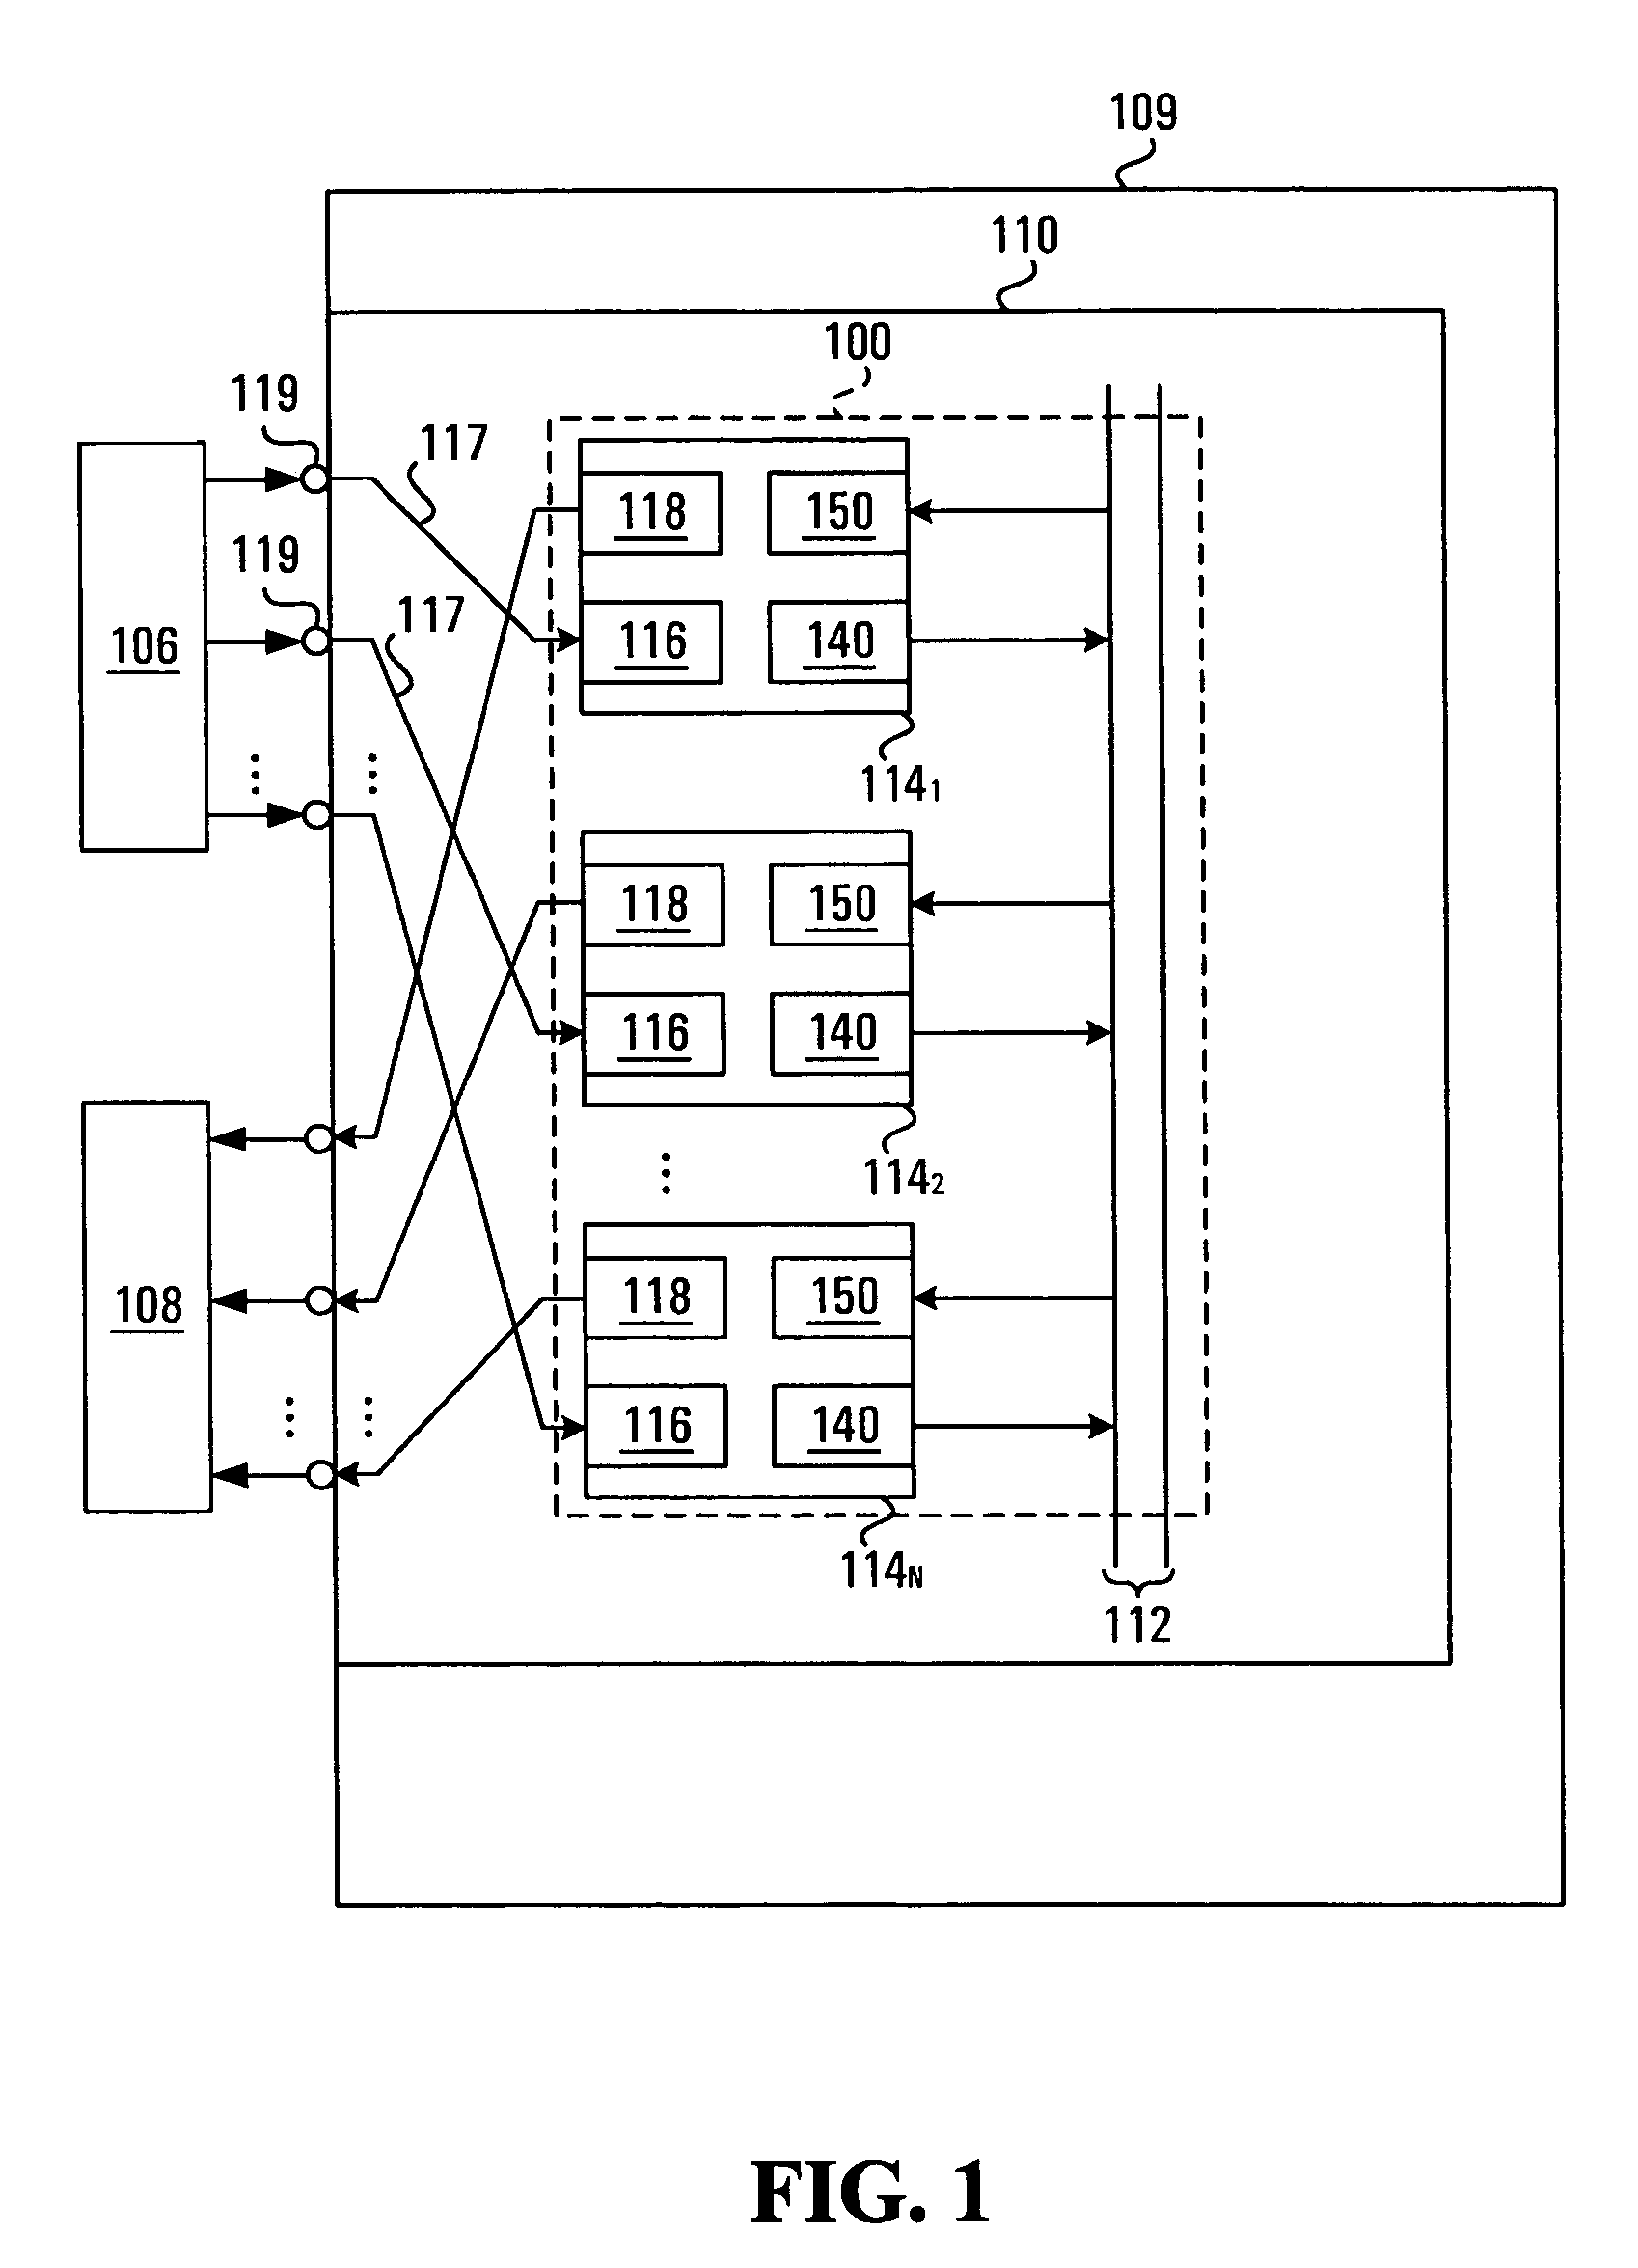 Cell-based switch fabric with distributed scheduling